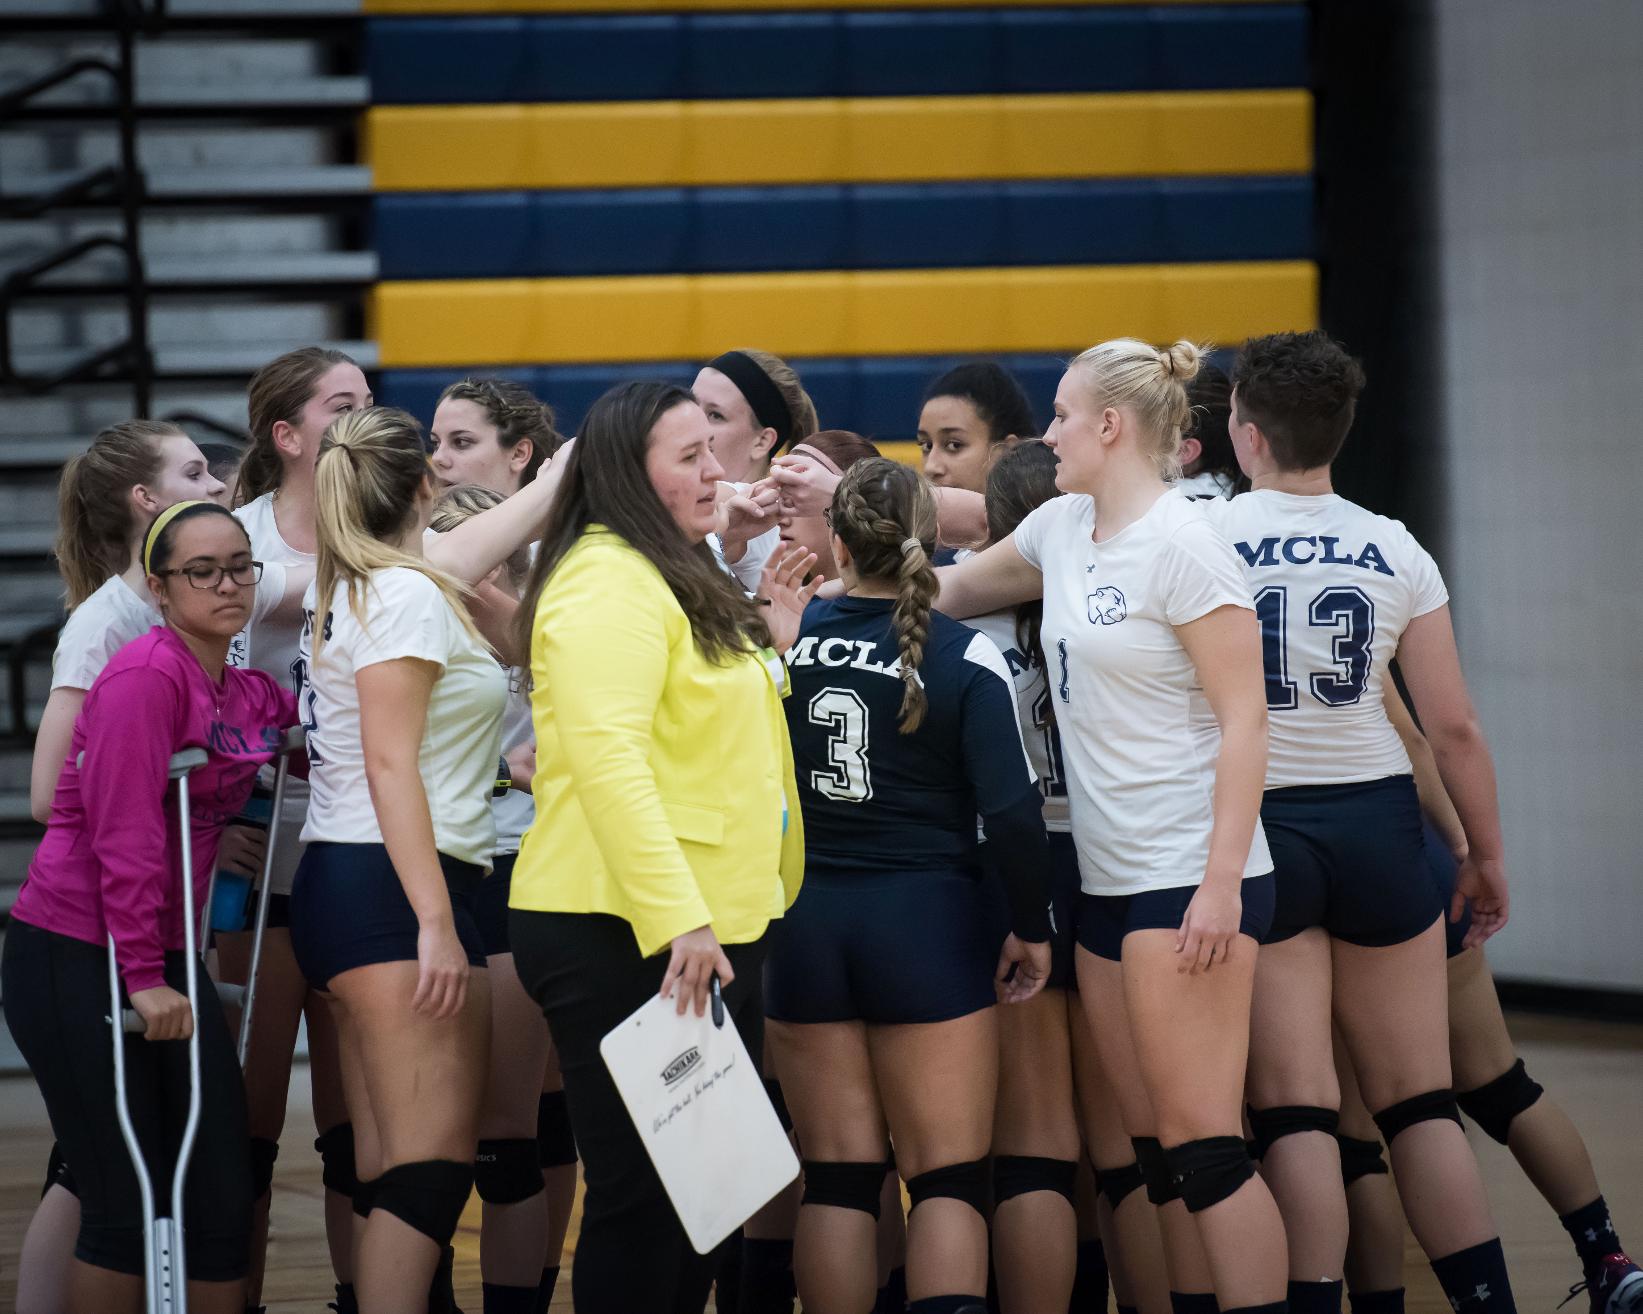 Third seeded Volleyball set to battle second seeded Westfield State on Saturday in Framingham